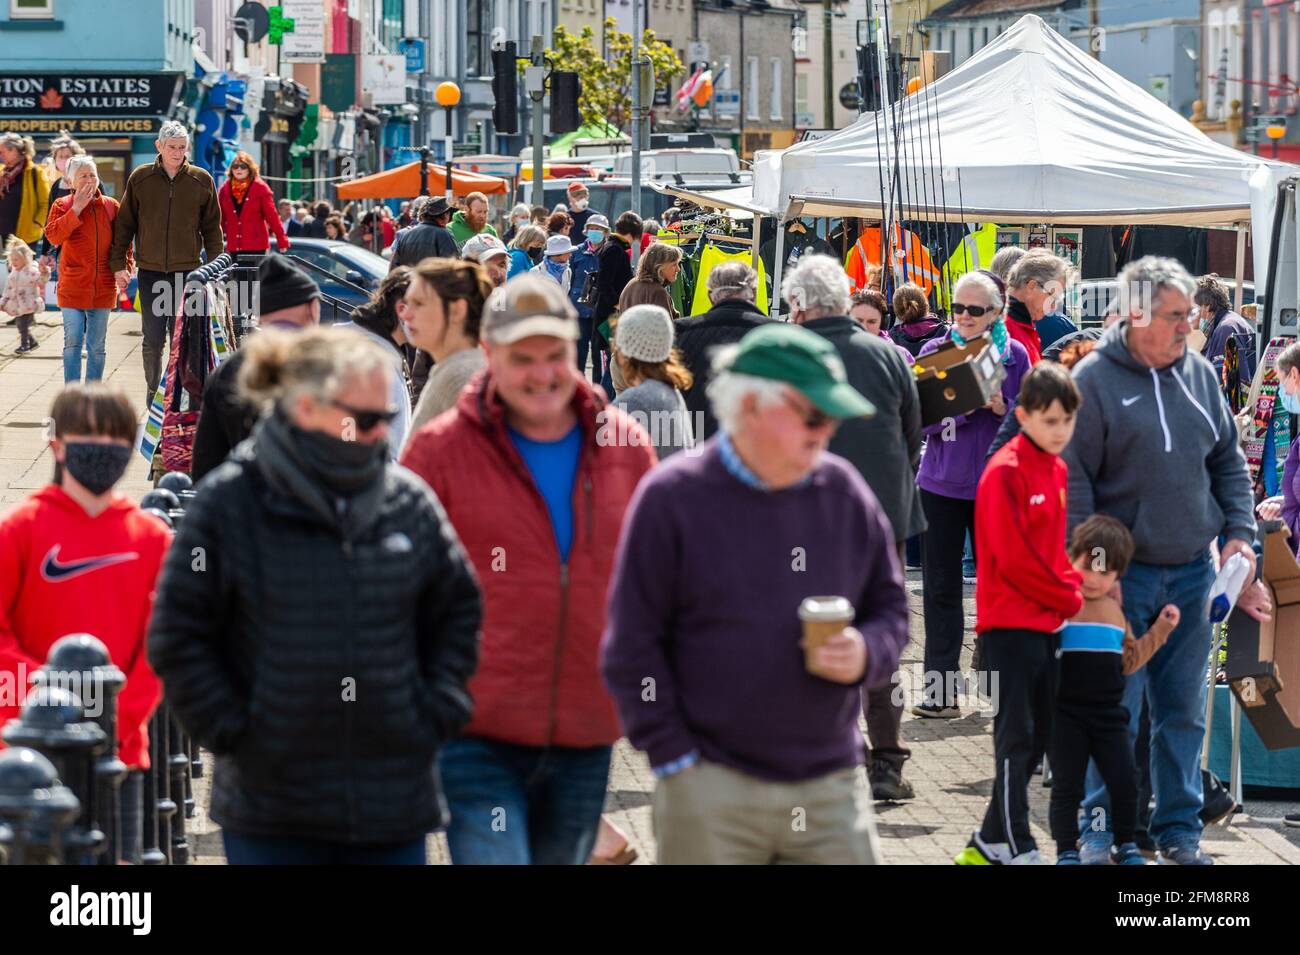 Bantry, West Cork, Ireland. 7th May, 2021. Bantry Friday Market was busy today, being the first market of the month. Many people were looking forward to some COVID-19 restrictions being relaxed on Monday 10th May. Credit: AG News/Alamy Live News Stock Photo